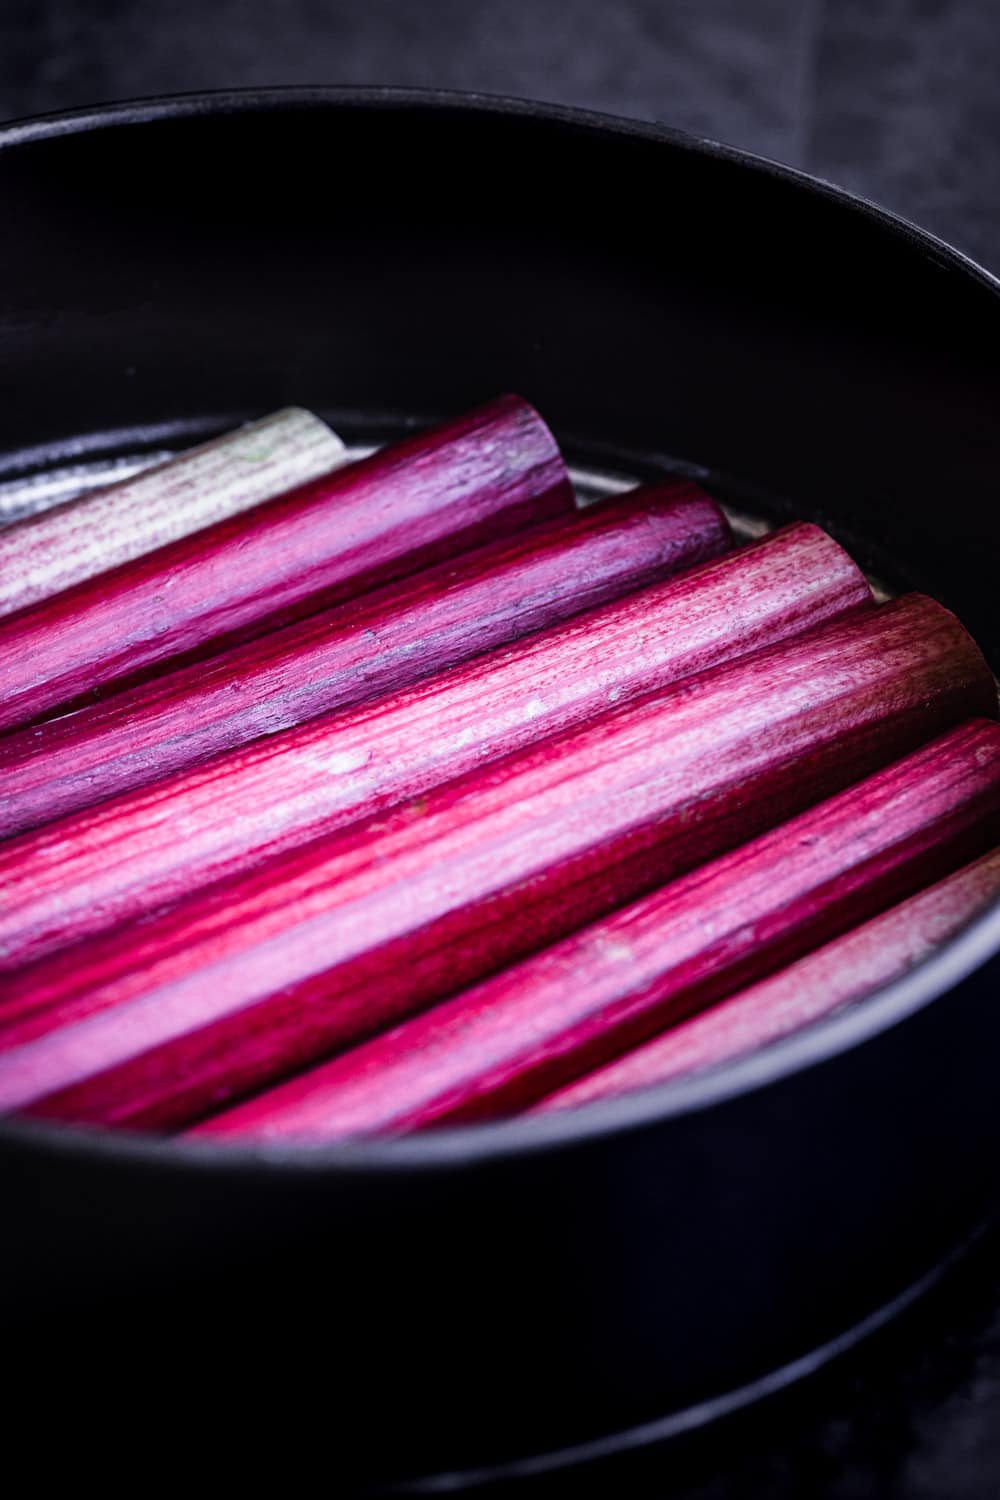 Rhubarb stalks aligned in the cake pan, side angle shot.